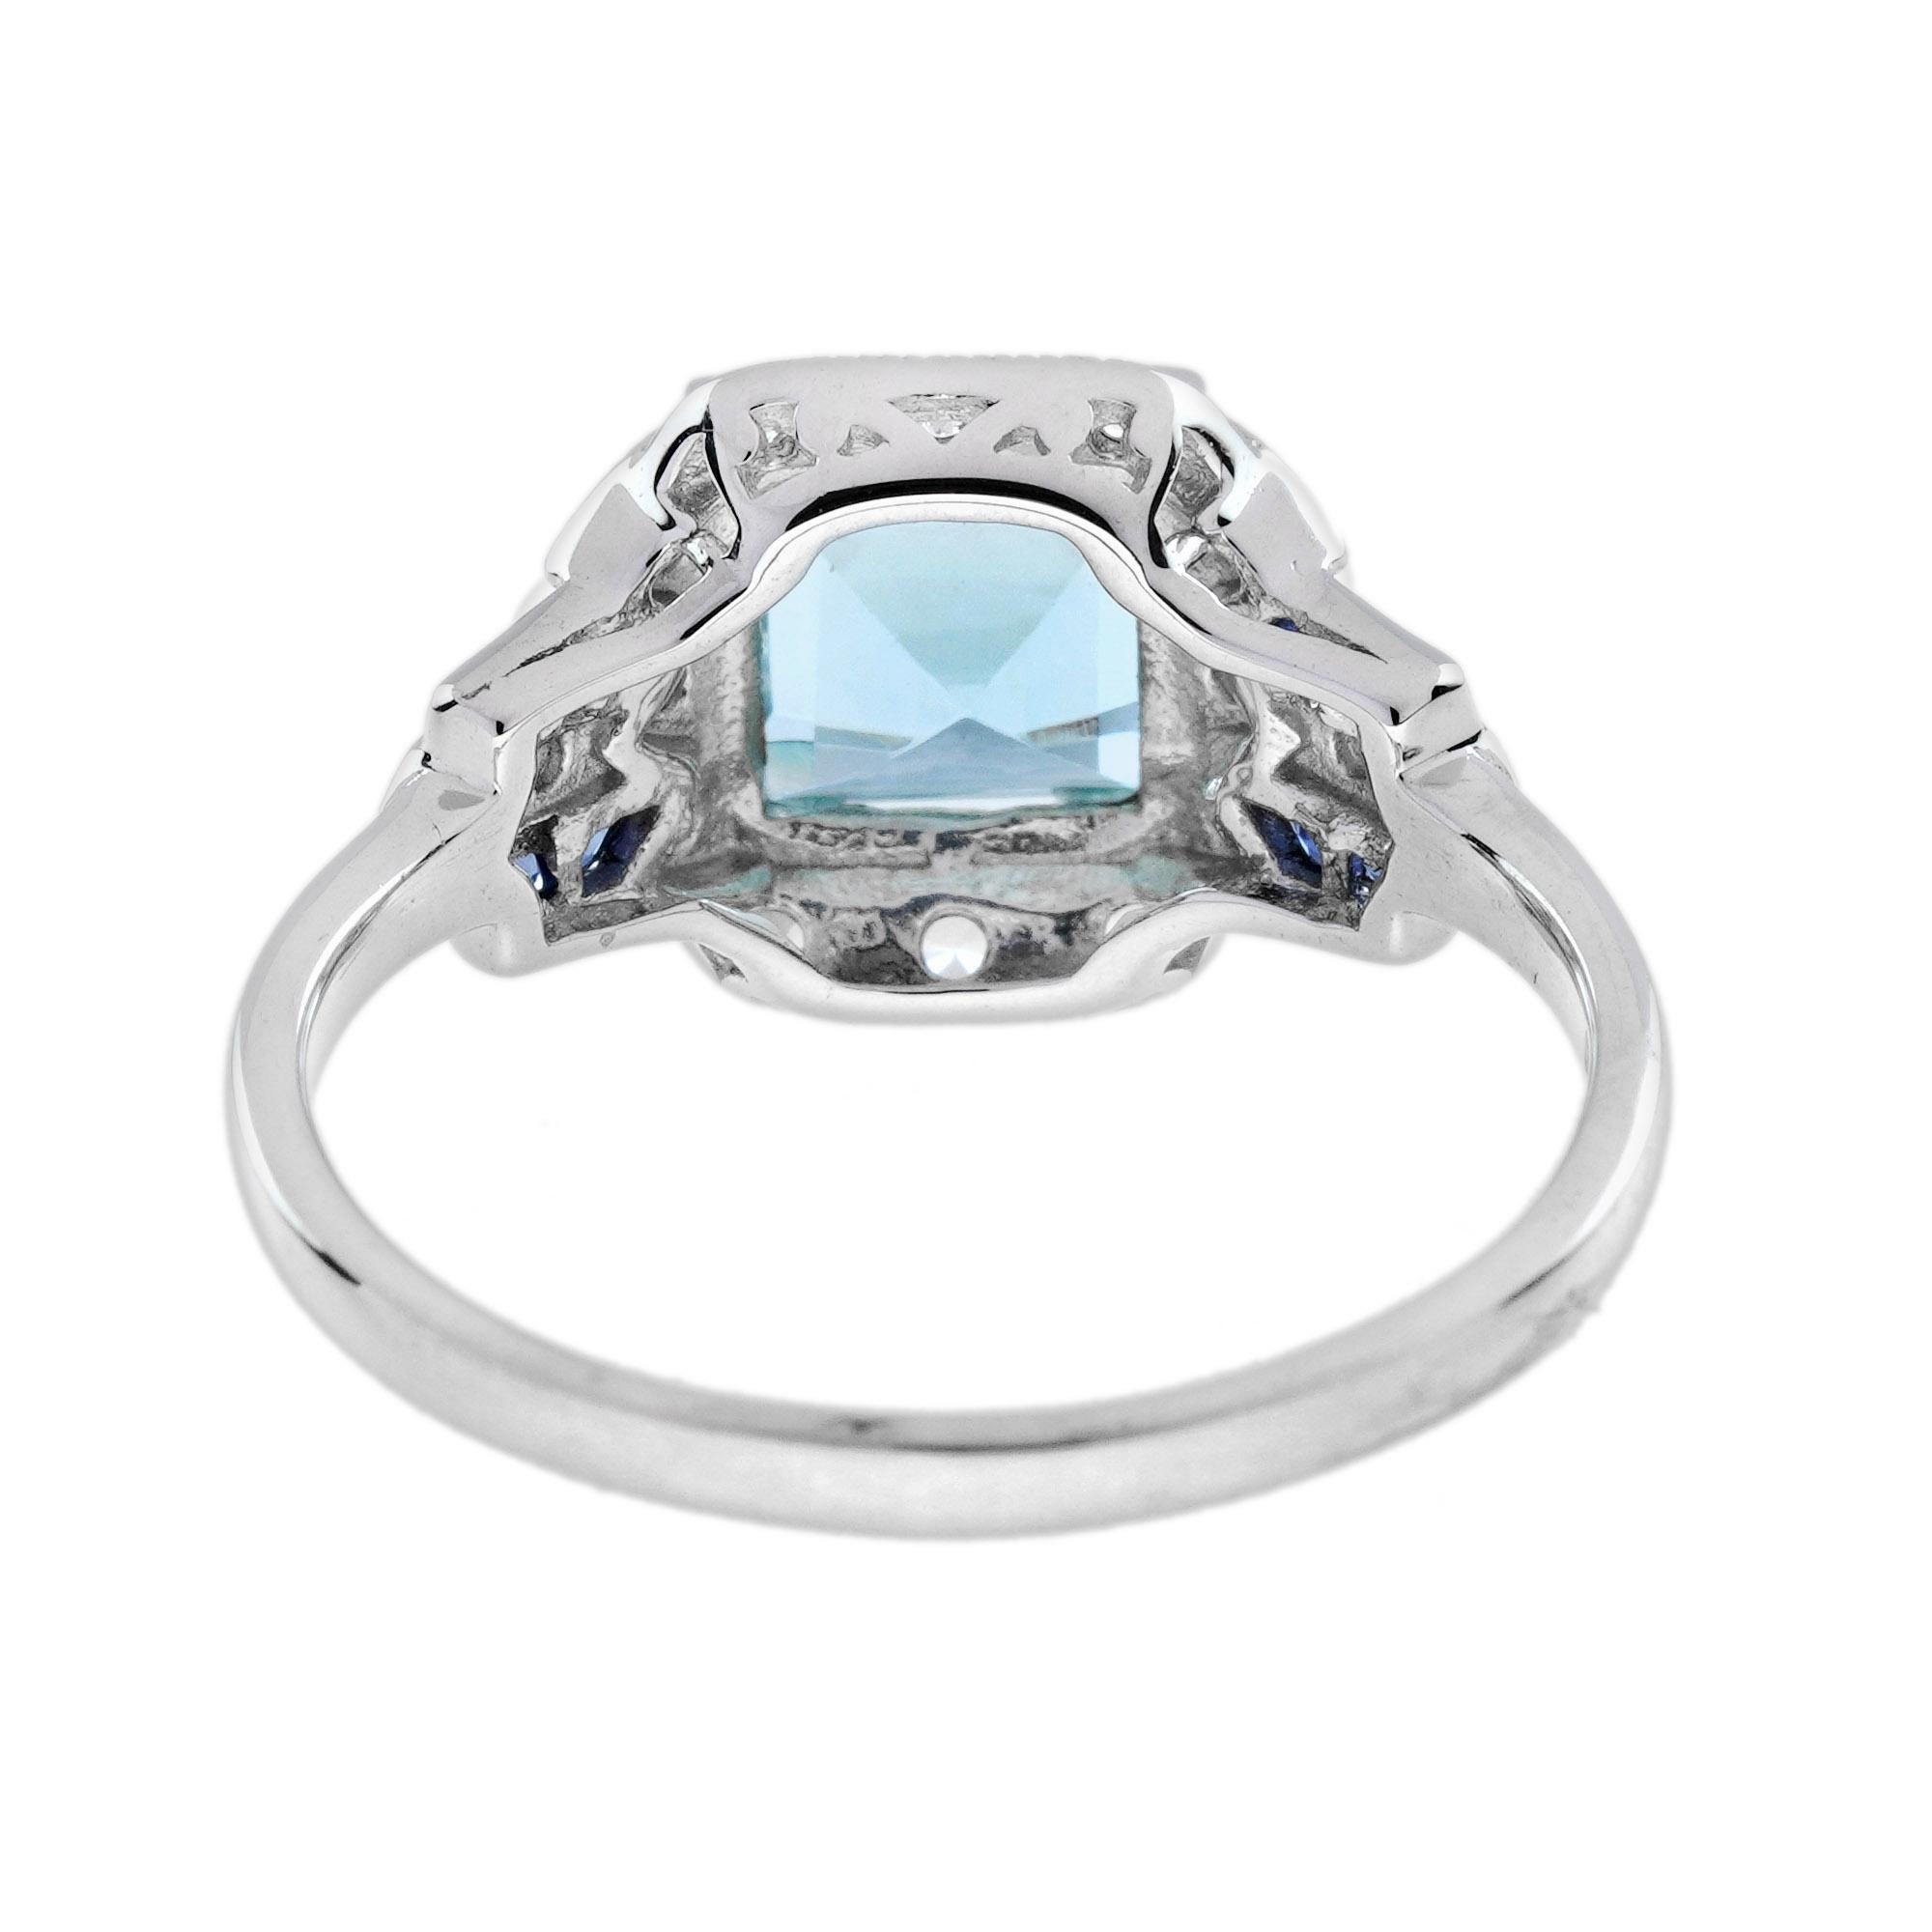 For Sale:  Square Blue Topaz Sapphire Diamond Art Deco Style Engagement Ring in 14K Gold 5